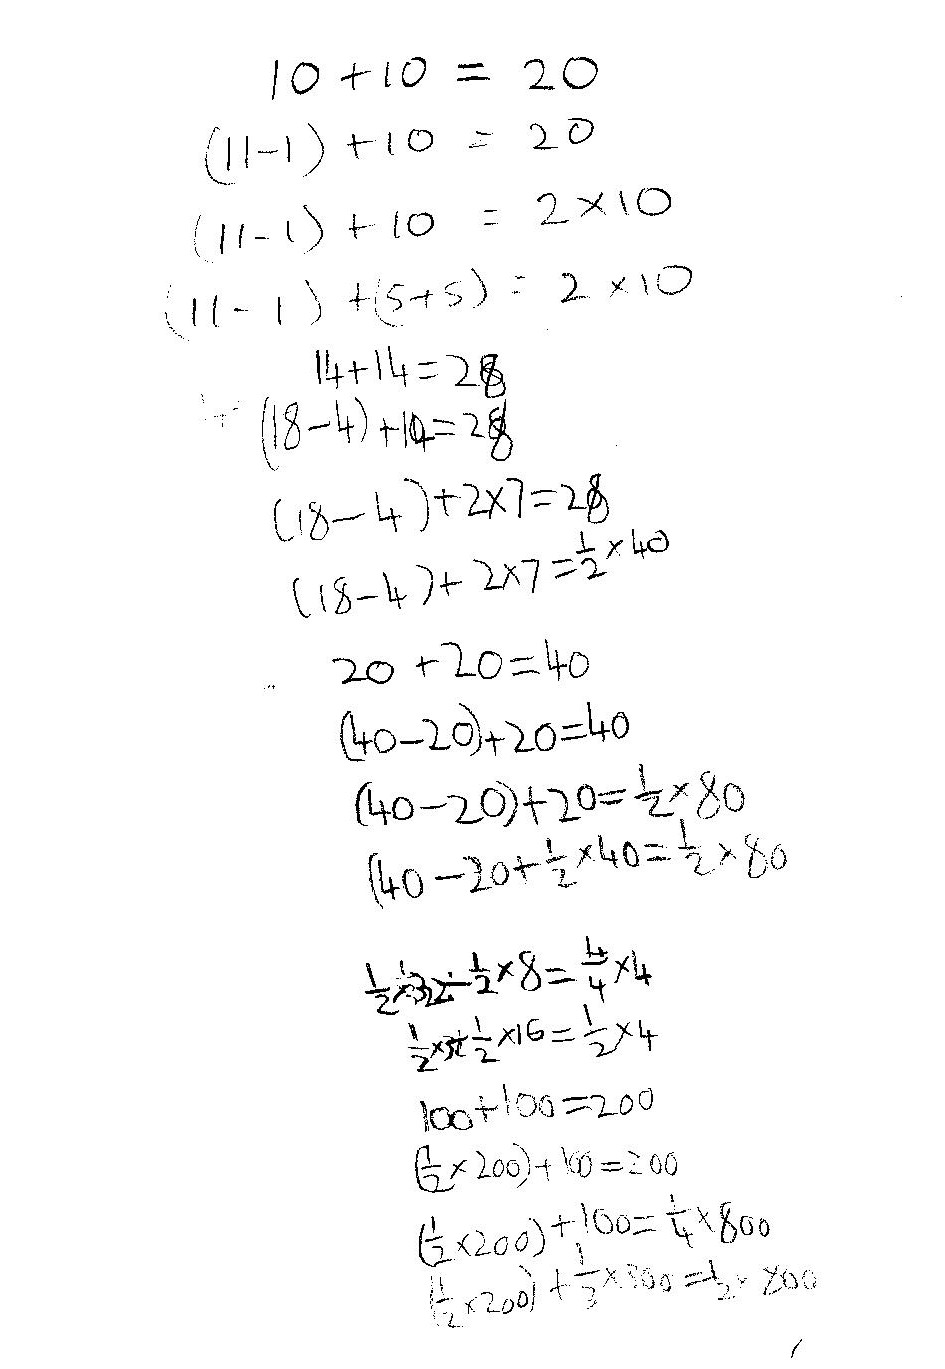 Year 3 – written after playing a class game where the same equations is rewritten with only one term replaced each time